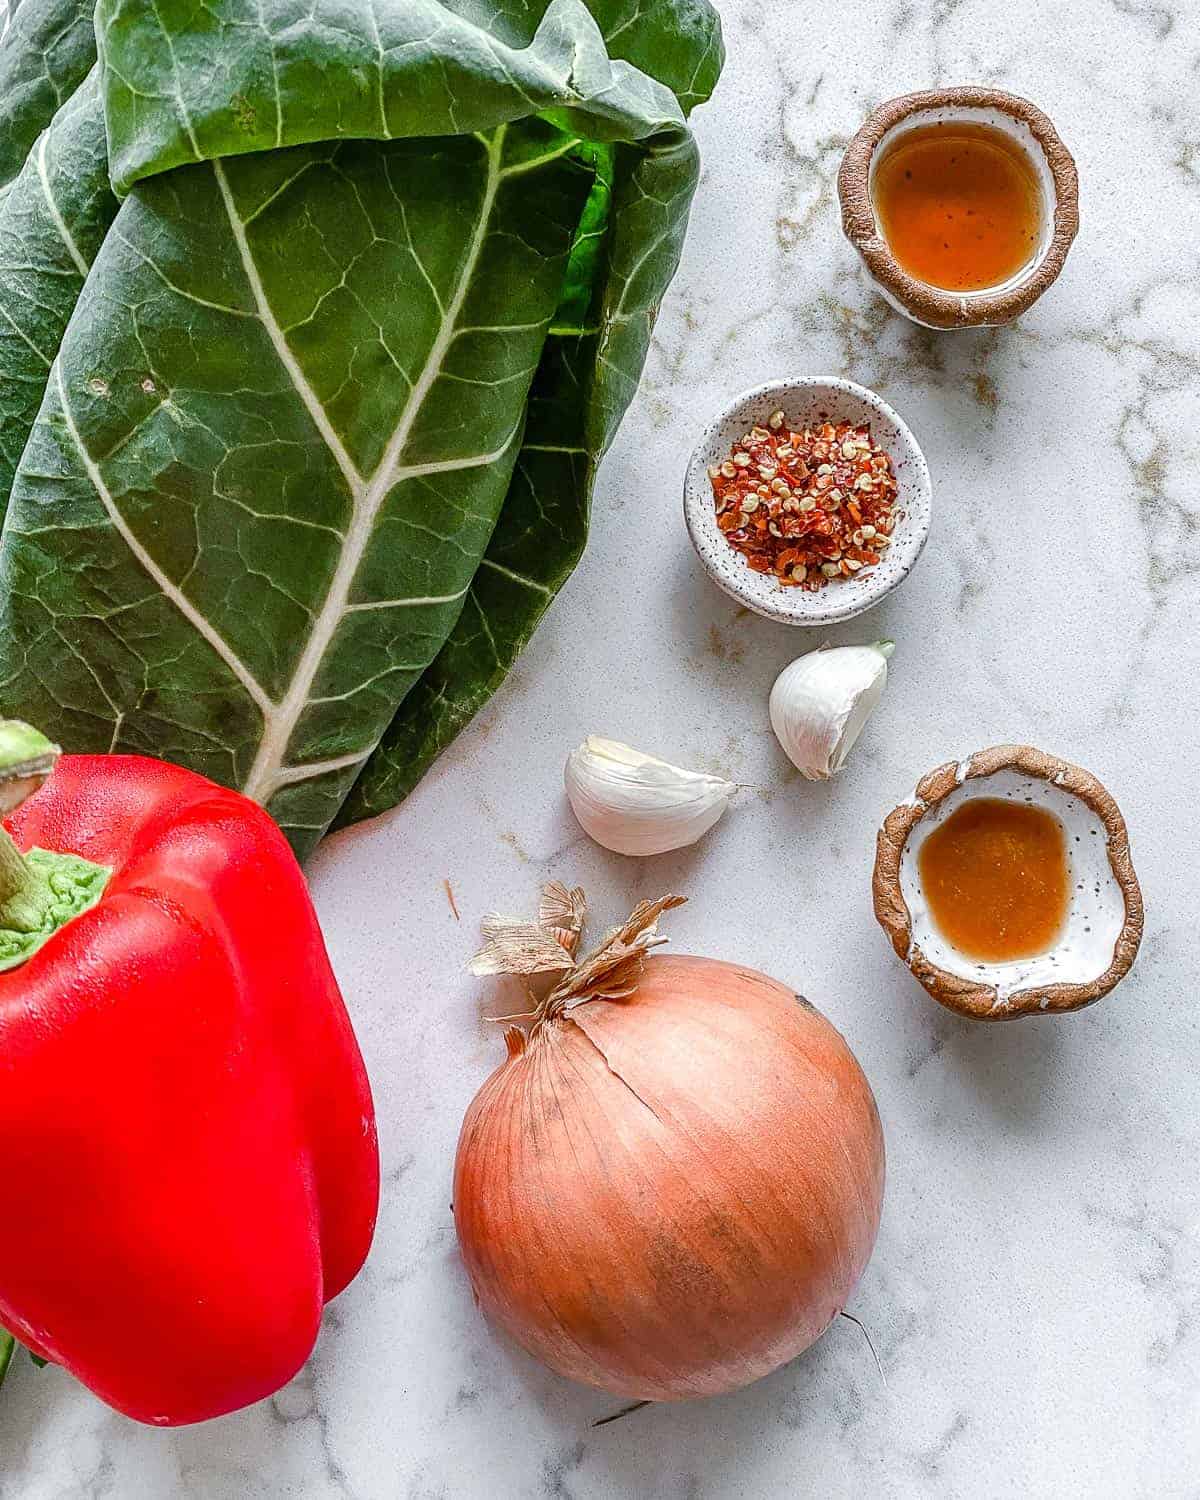 ingredients for Spicy Collard Greens measured out against a white surface